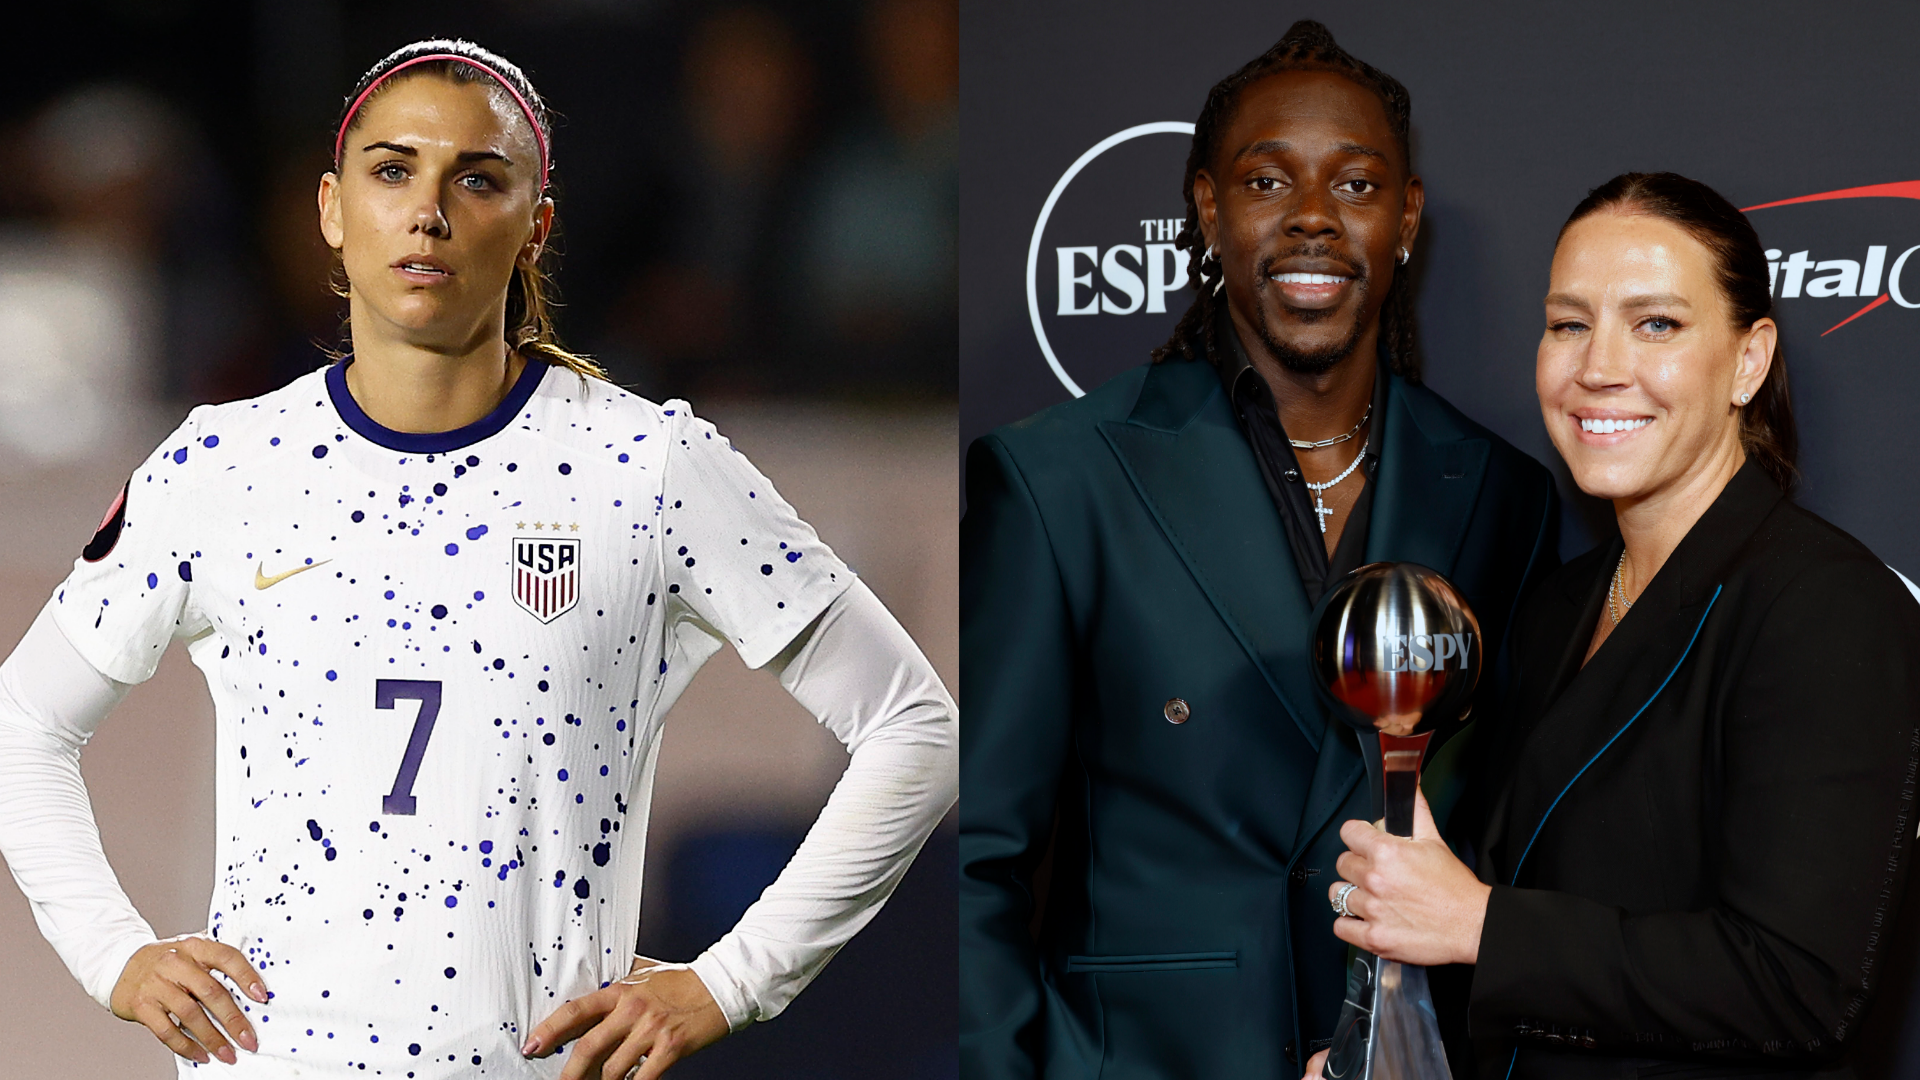 Boston Celtics roasted by Alex Morgan for embarrassing USWNT kit gaffe after sharing picture of Jrue Holiday - husband of World Cup winner Lauren Holiday